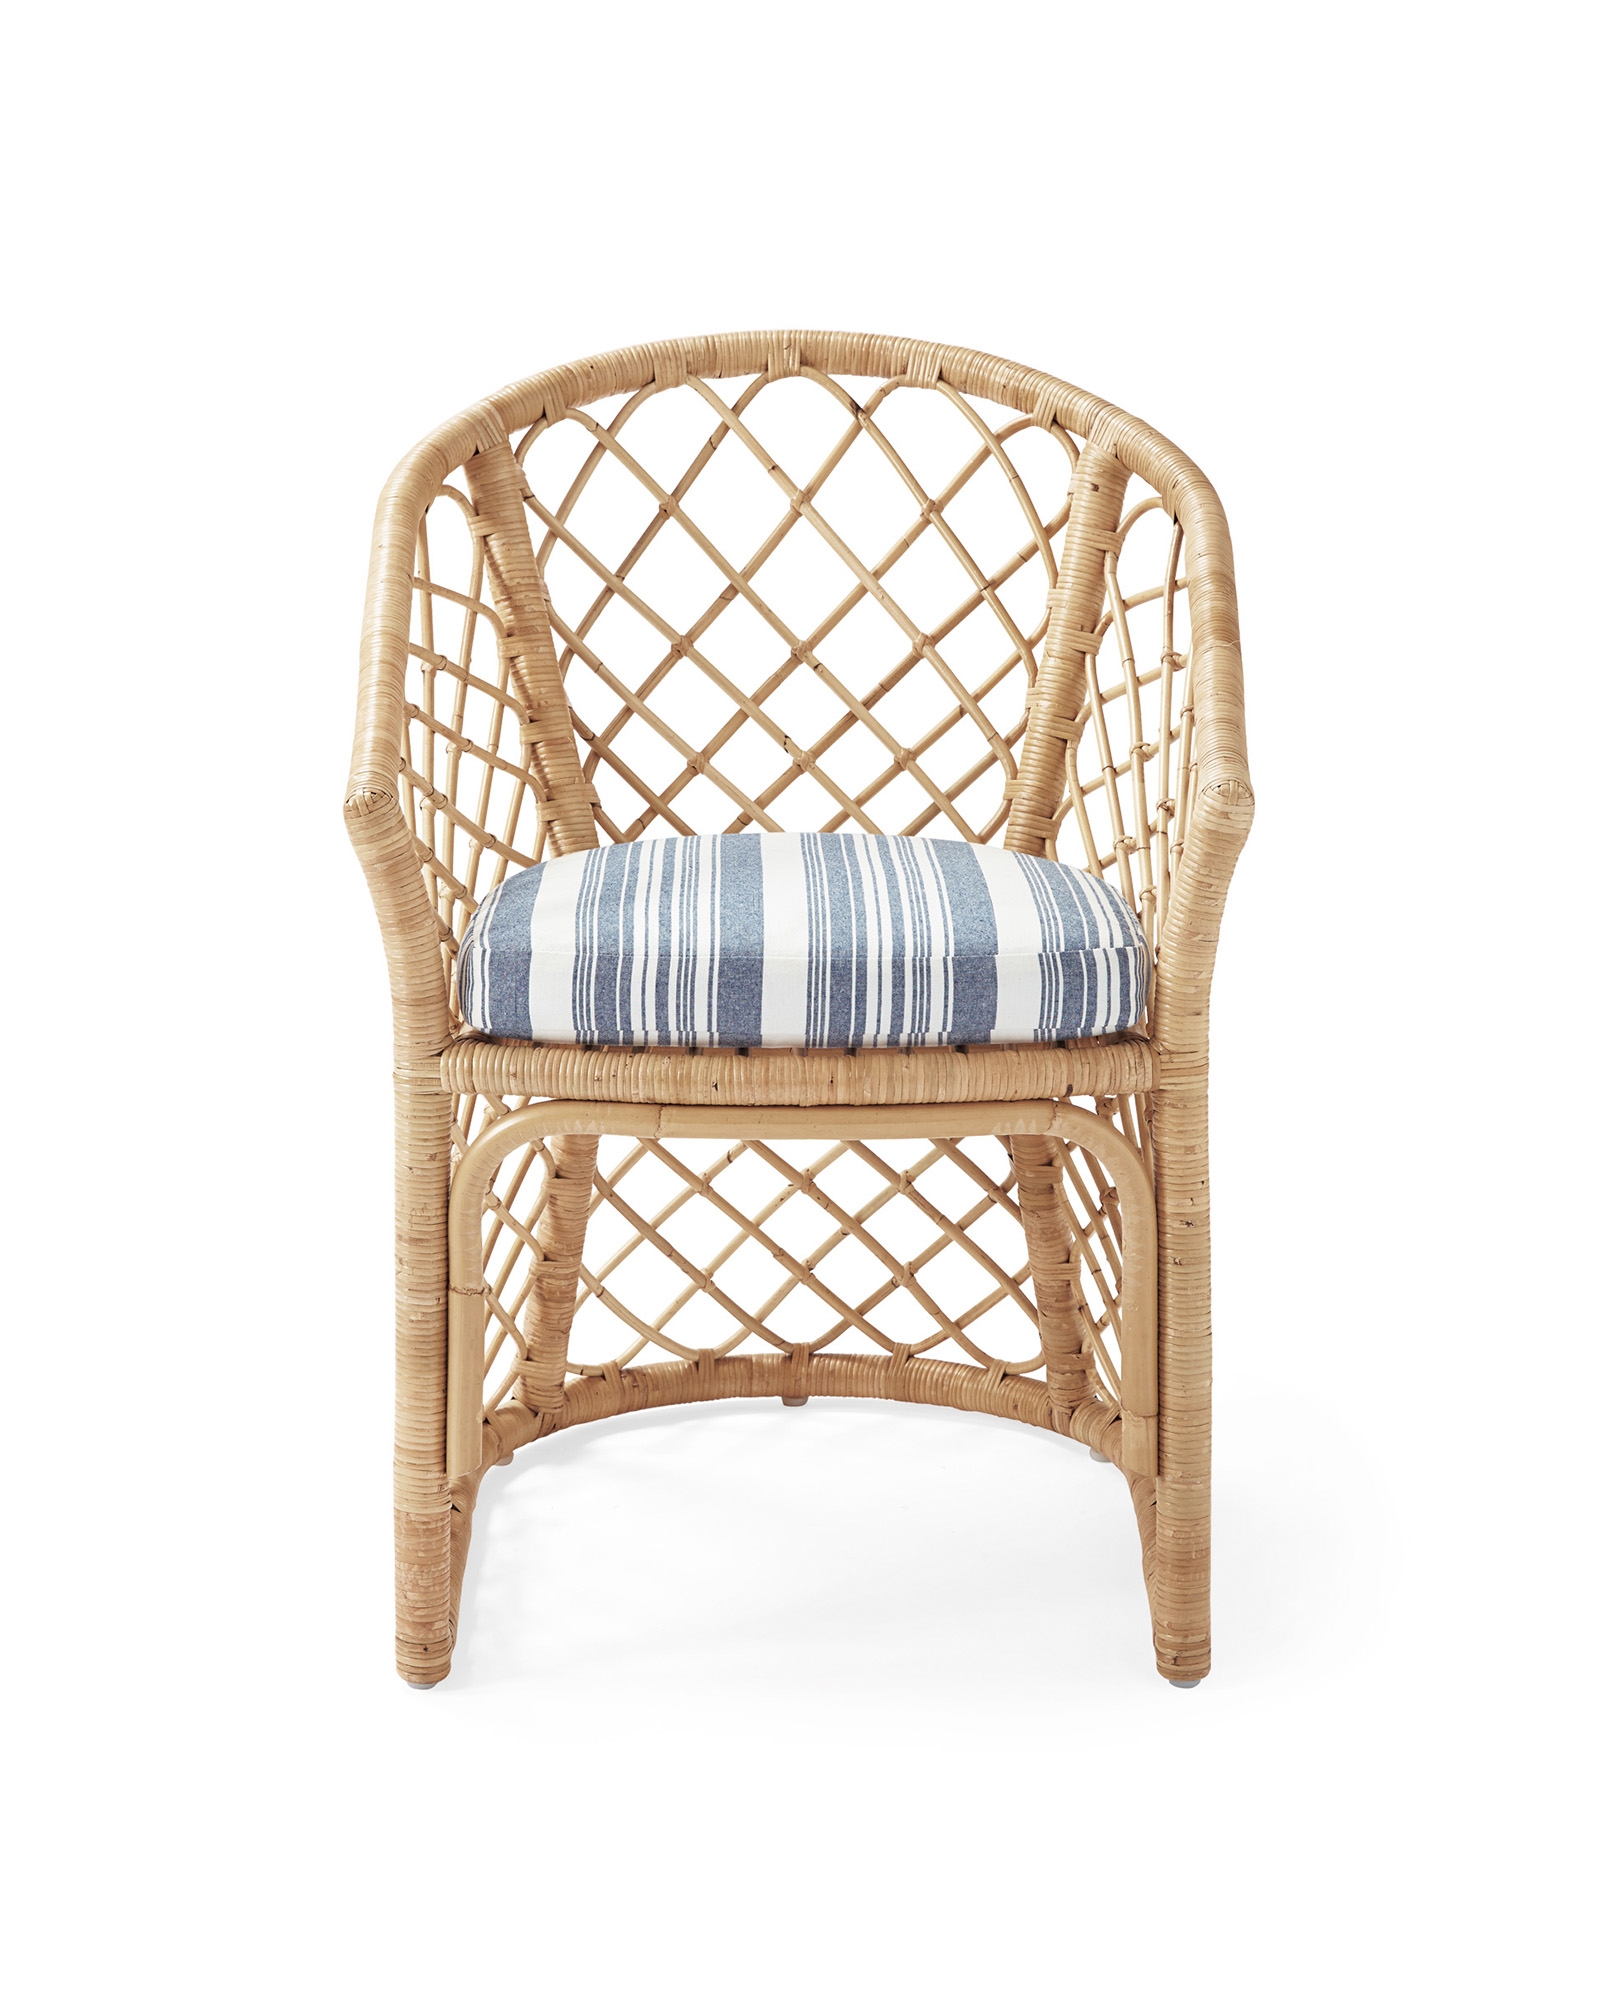 Avalon Dining Chair - Chambray Stripe Cushion - Image 1